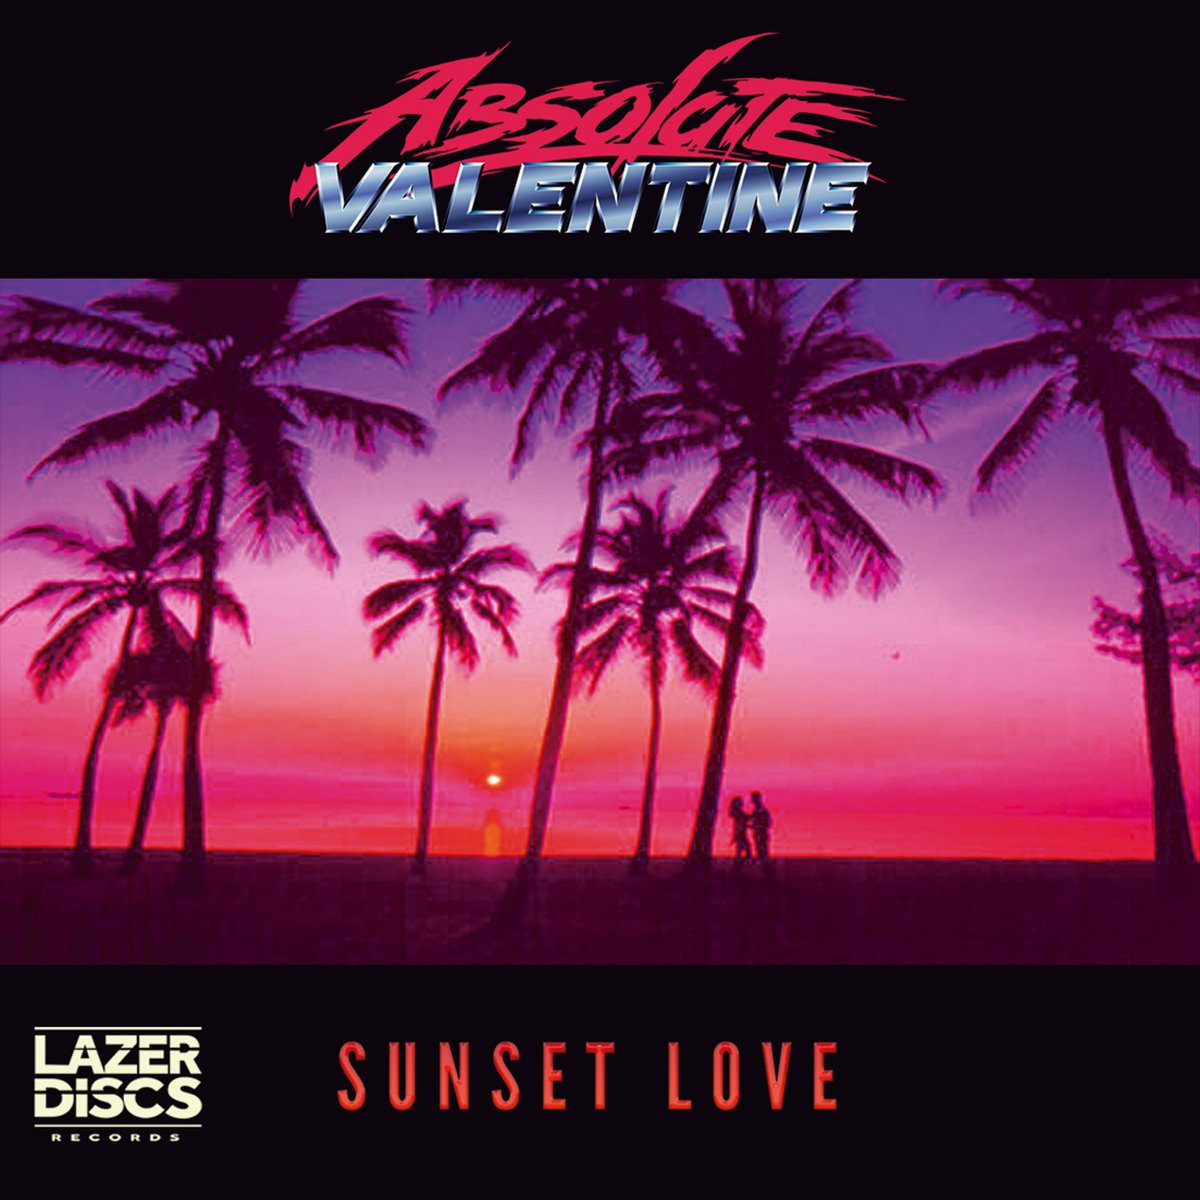 Hex Wolves - Absolute Valentine - Sunset Love